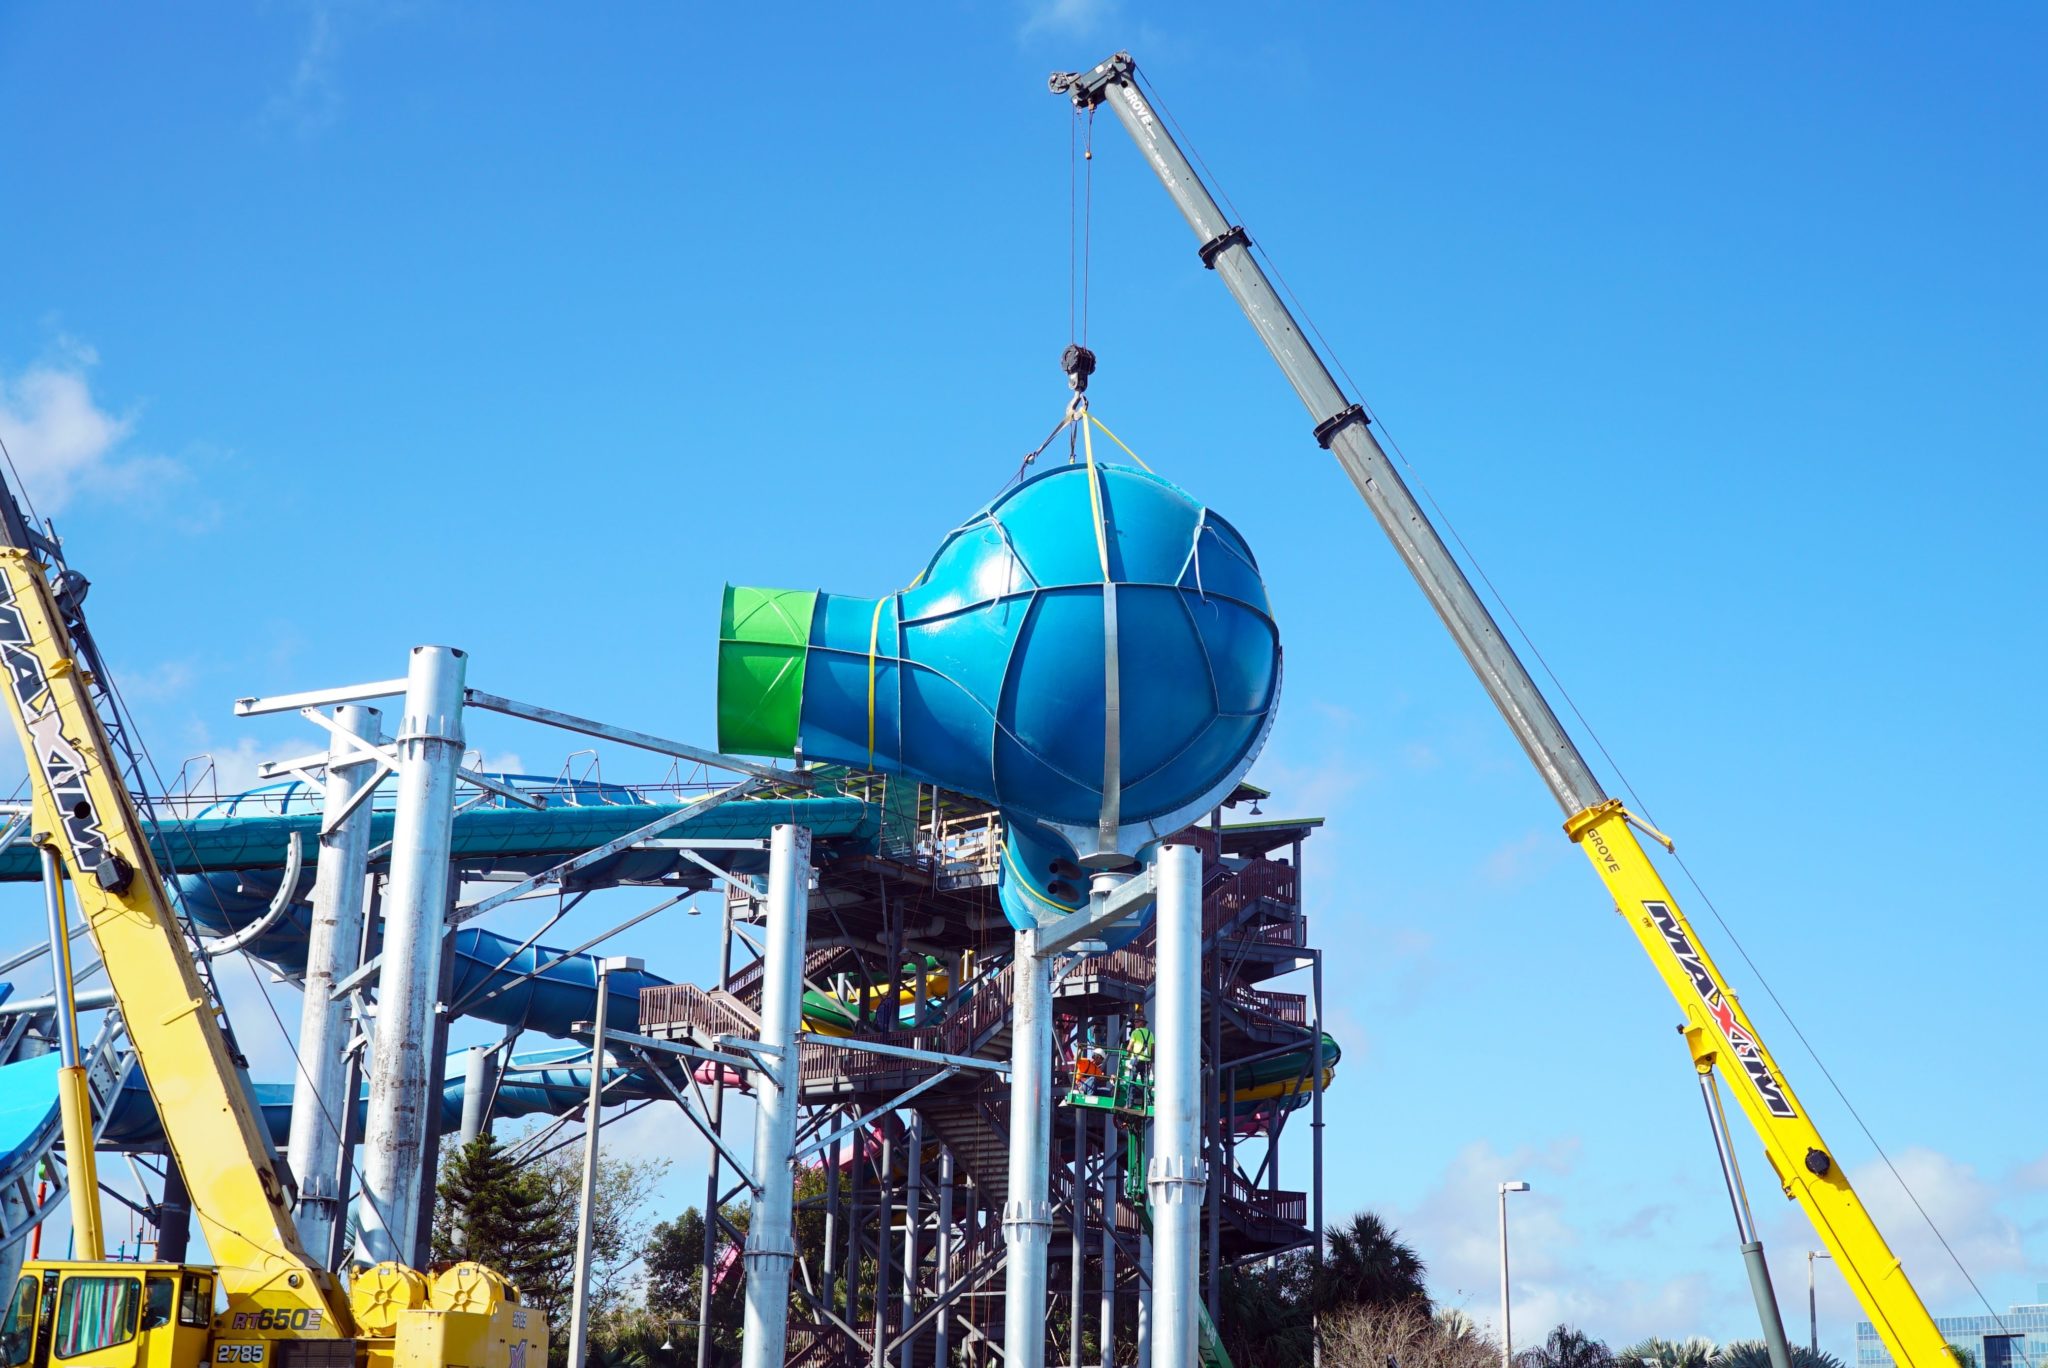 Aquatica’s Ray Rush Reaches New Heights Ahead of Spring Debut